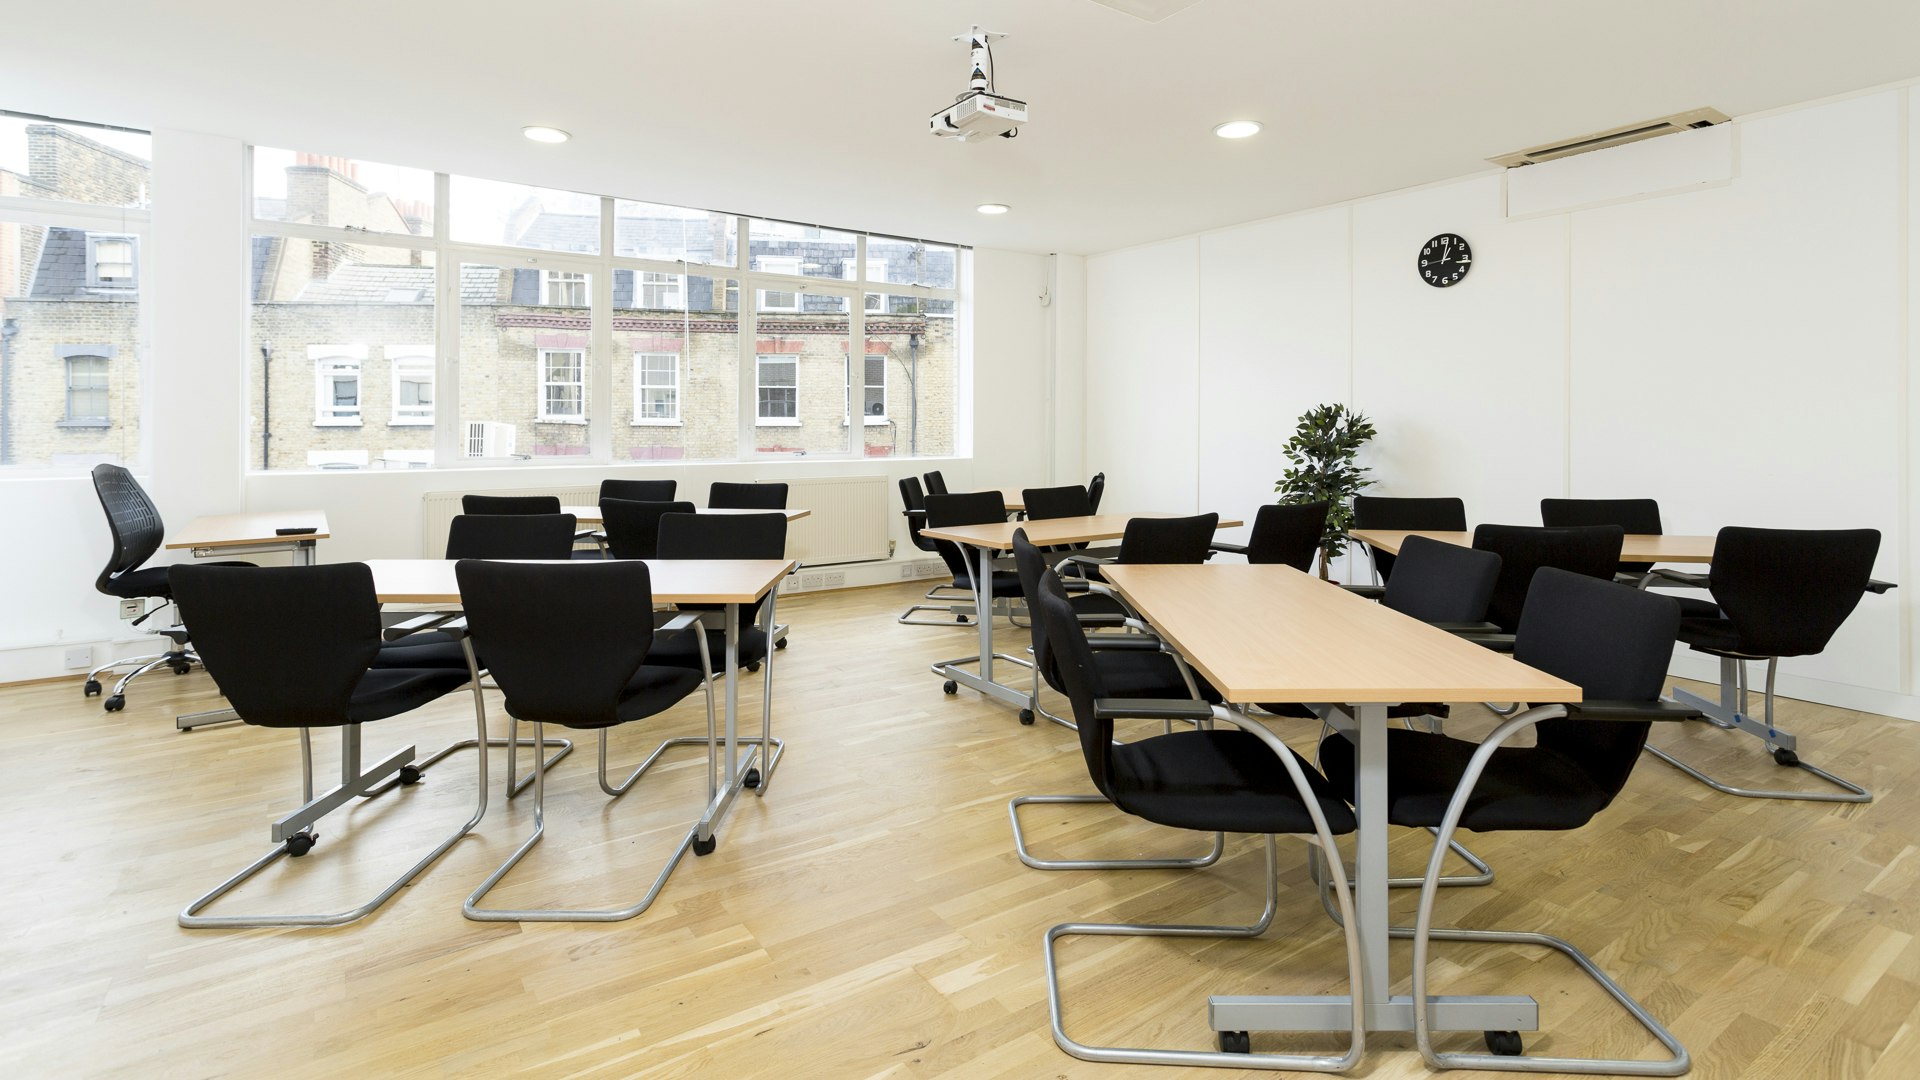 The Training Room Hire Company - Conference / Meeting Room (Large) image 3